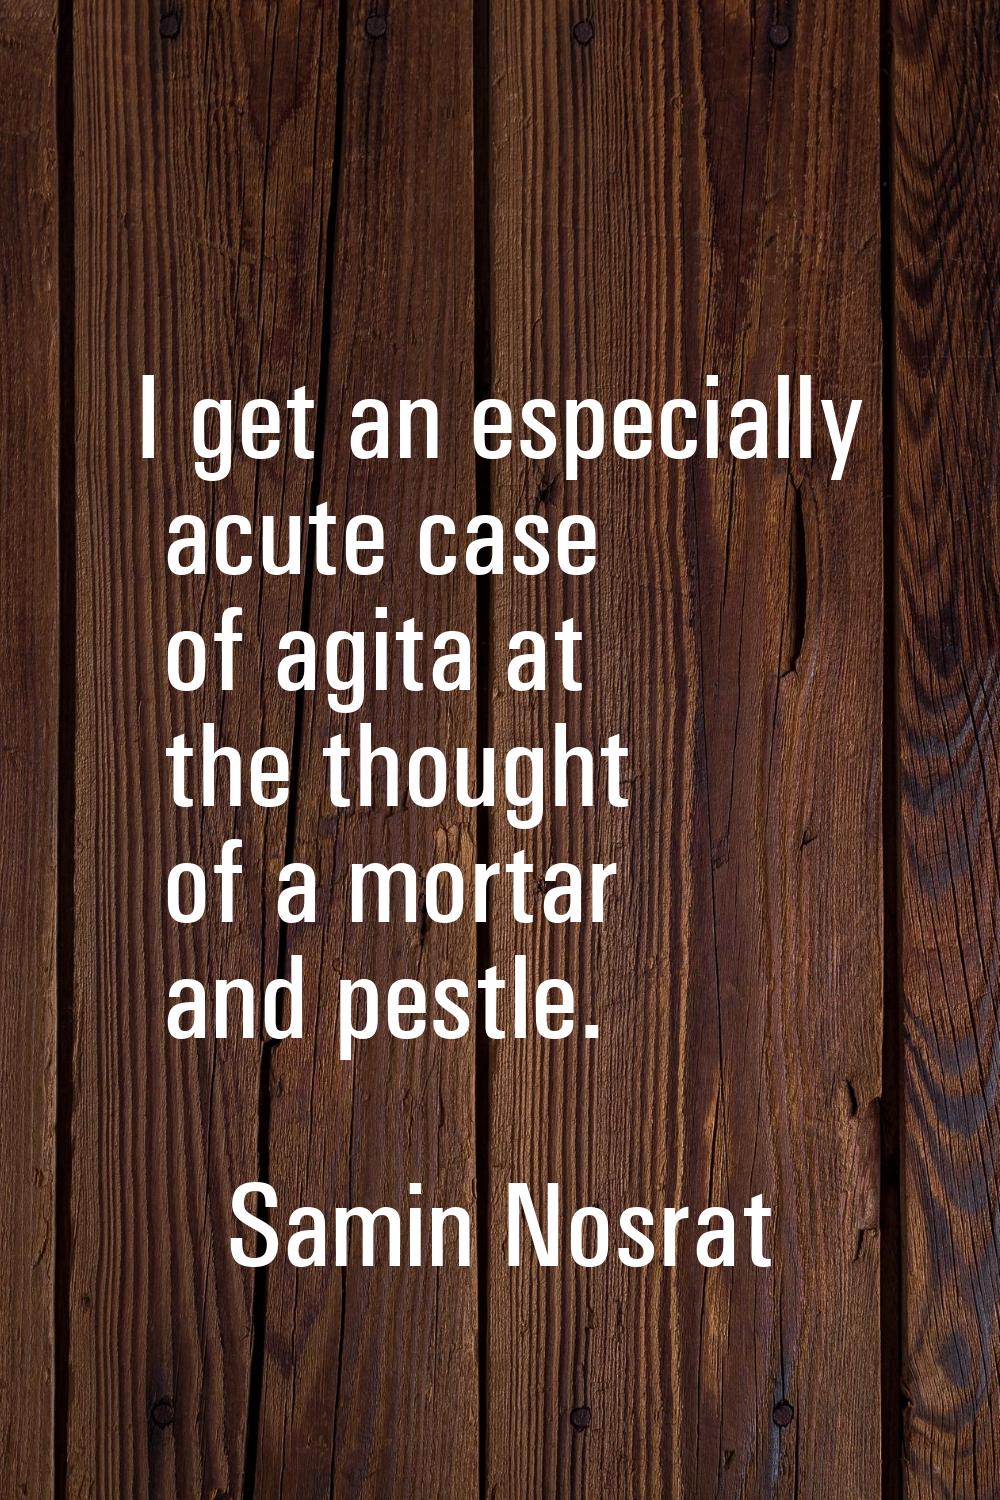 I get an especially acute case of agita at the thought of a mortar and pestle.